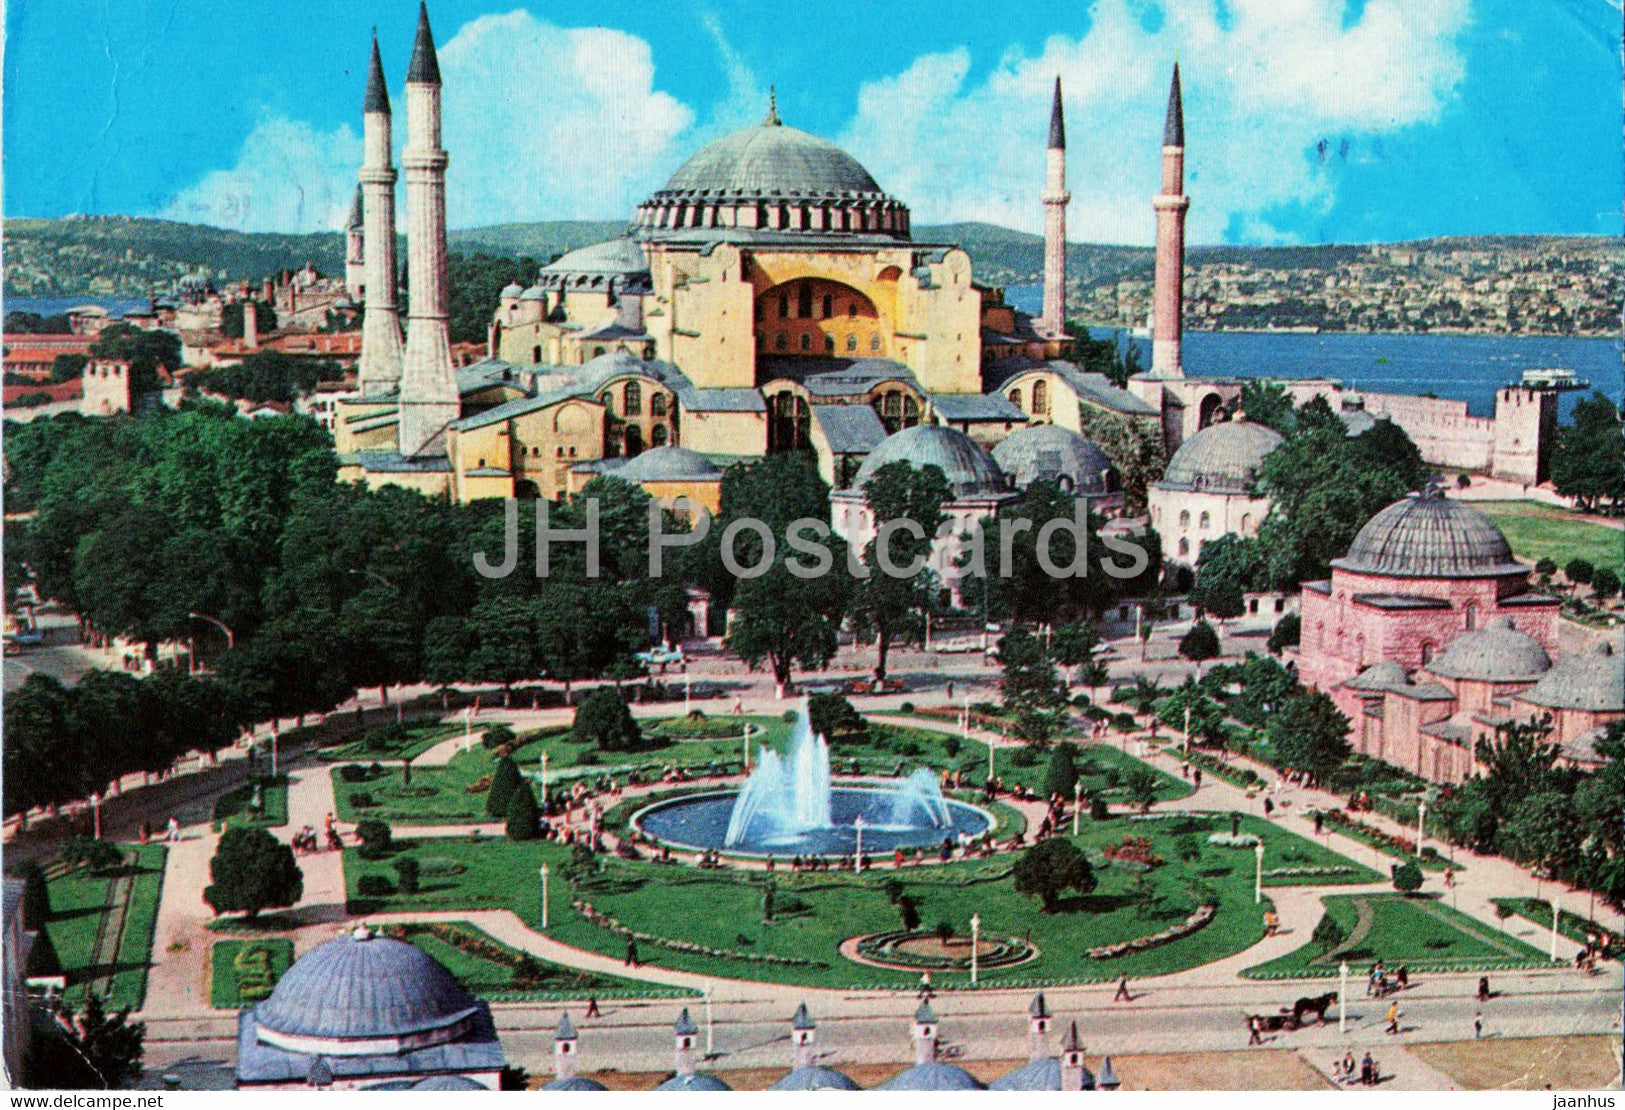 Istanbul - A View from Aya Sofya - Efes Color - Turkey - used - JH Postcards